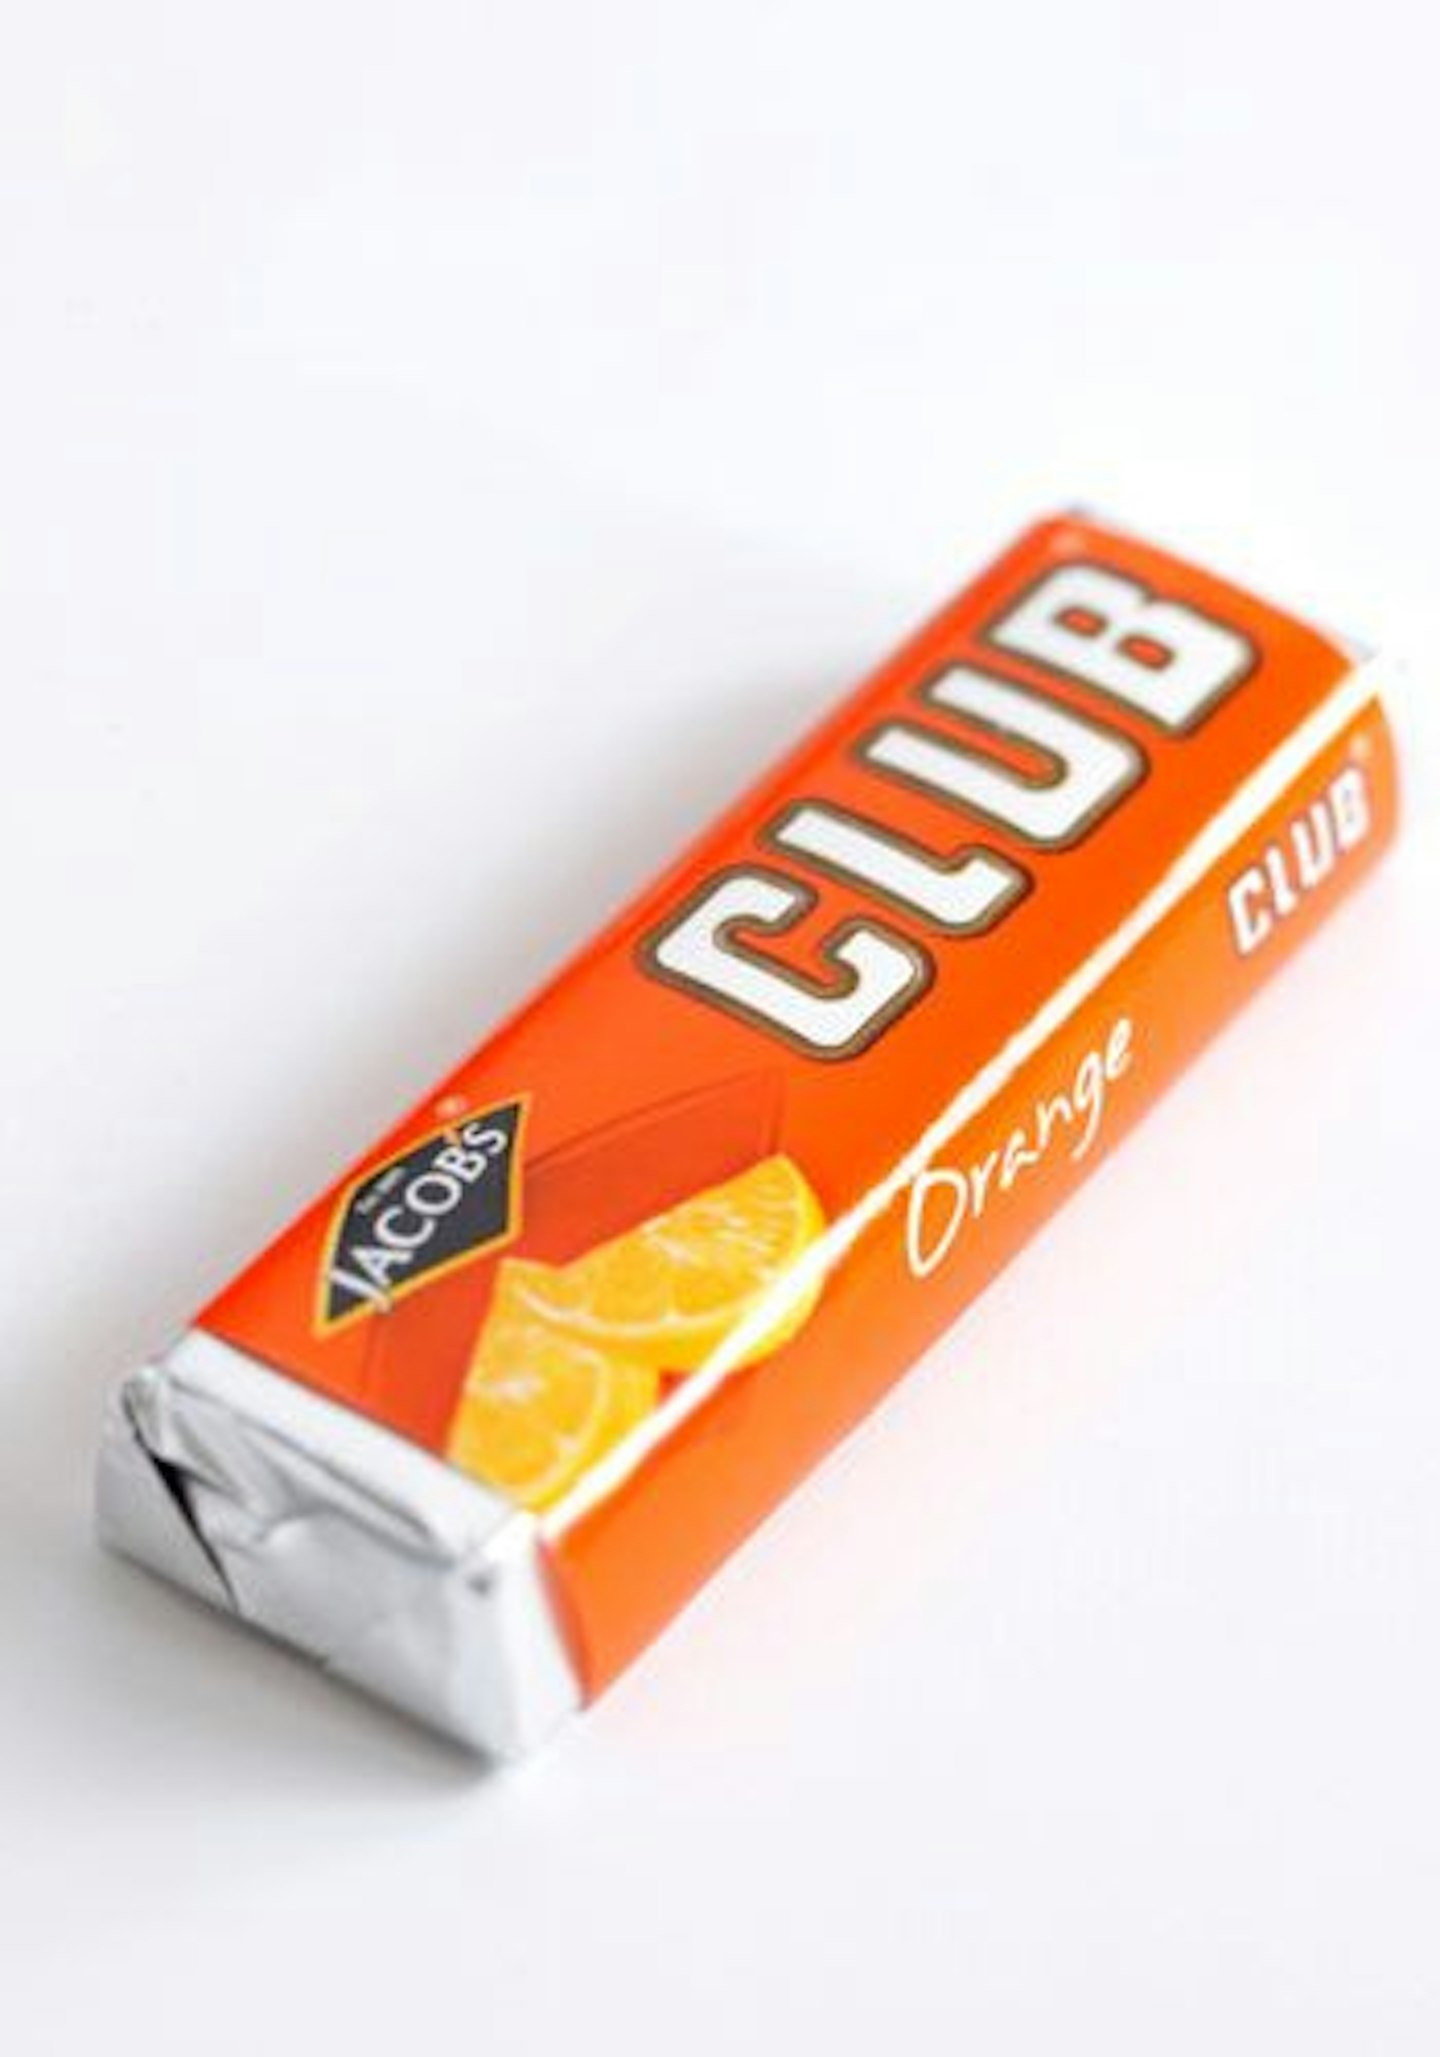 Club biscuits